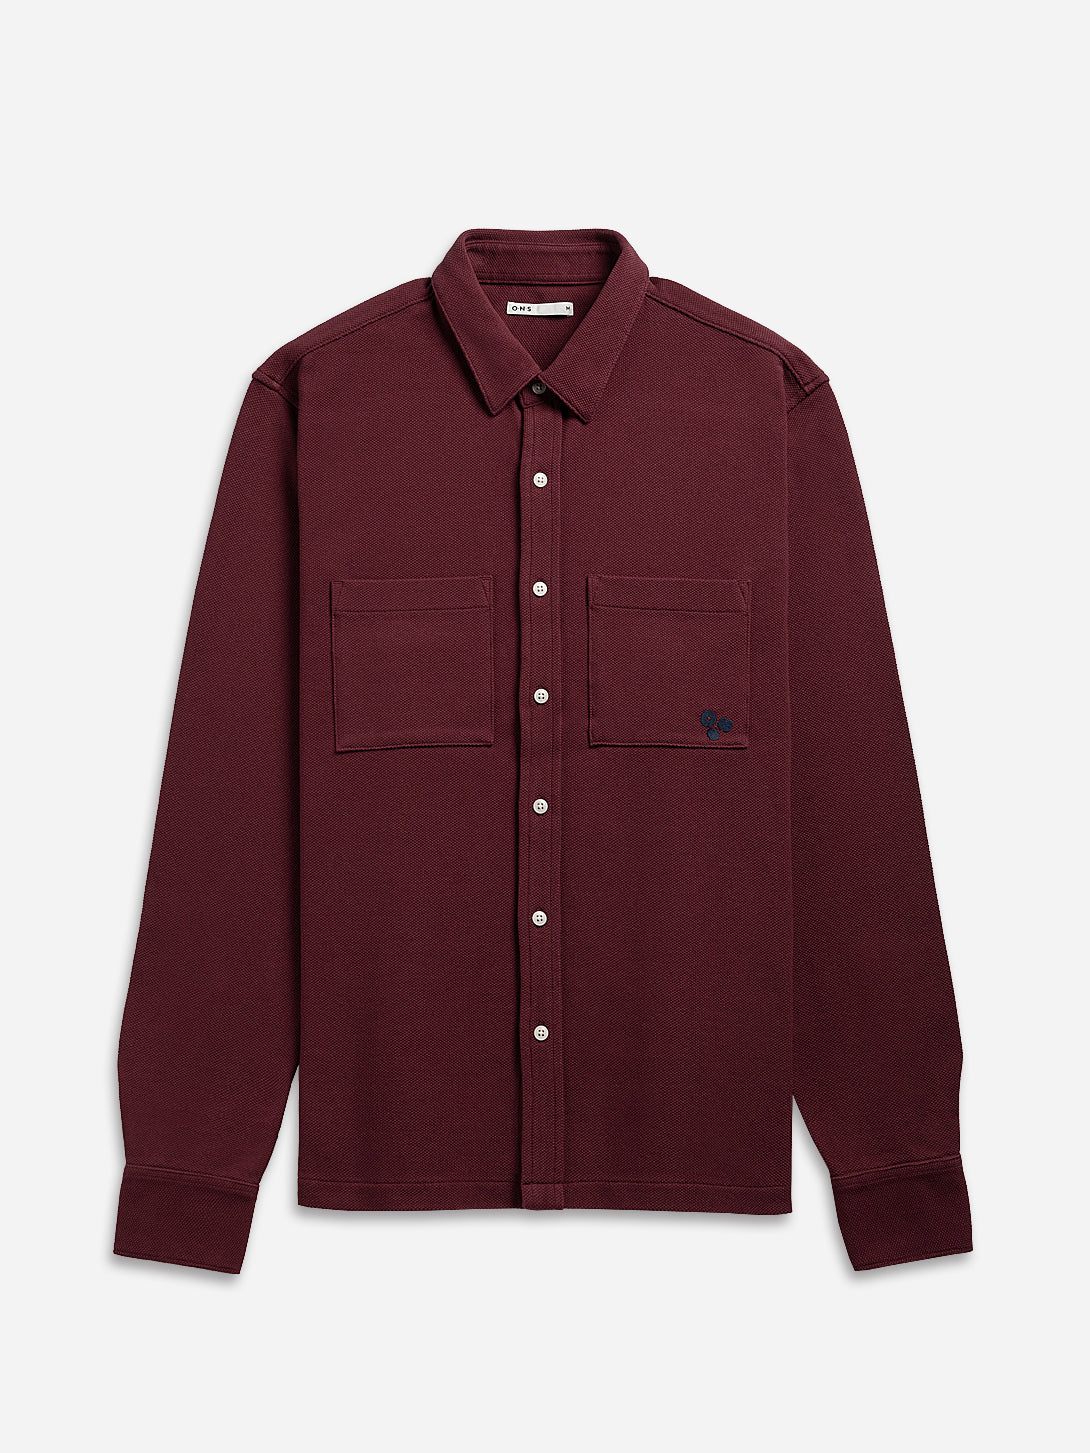 Red Wine Vance Pique Mens O.N.S Button Up Long Sleeve Knit Shirt 